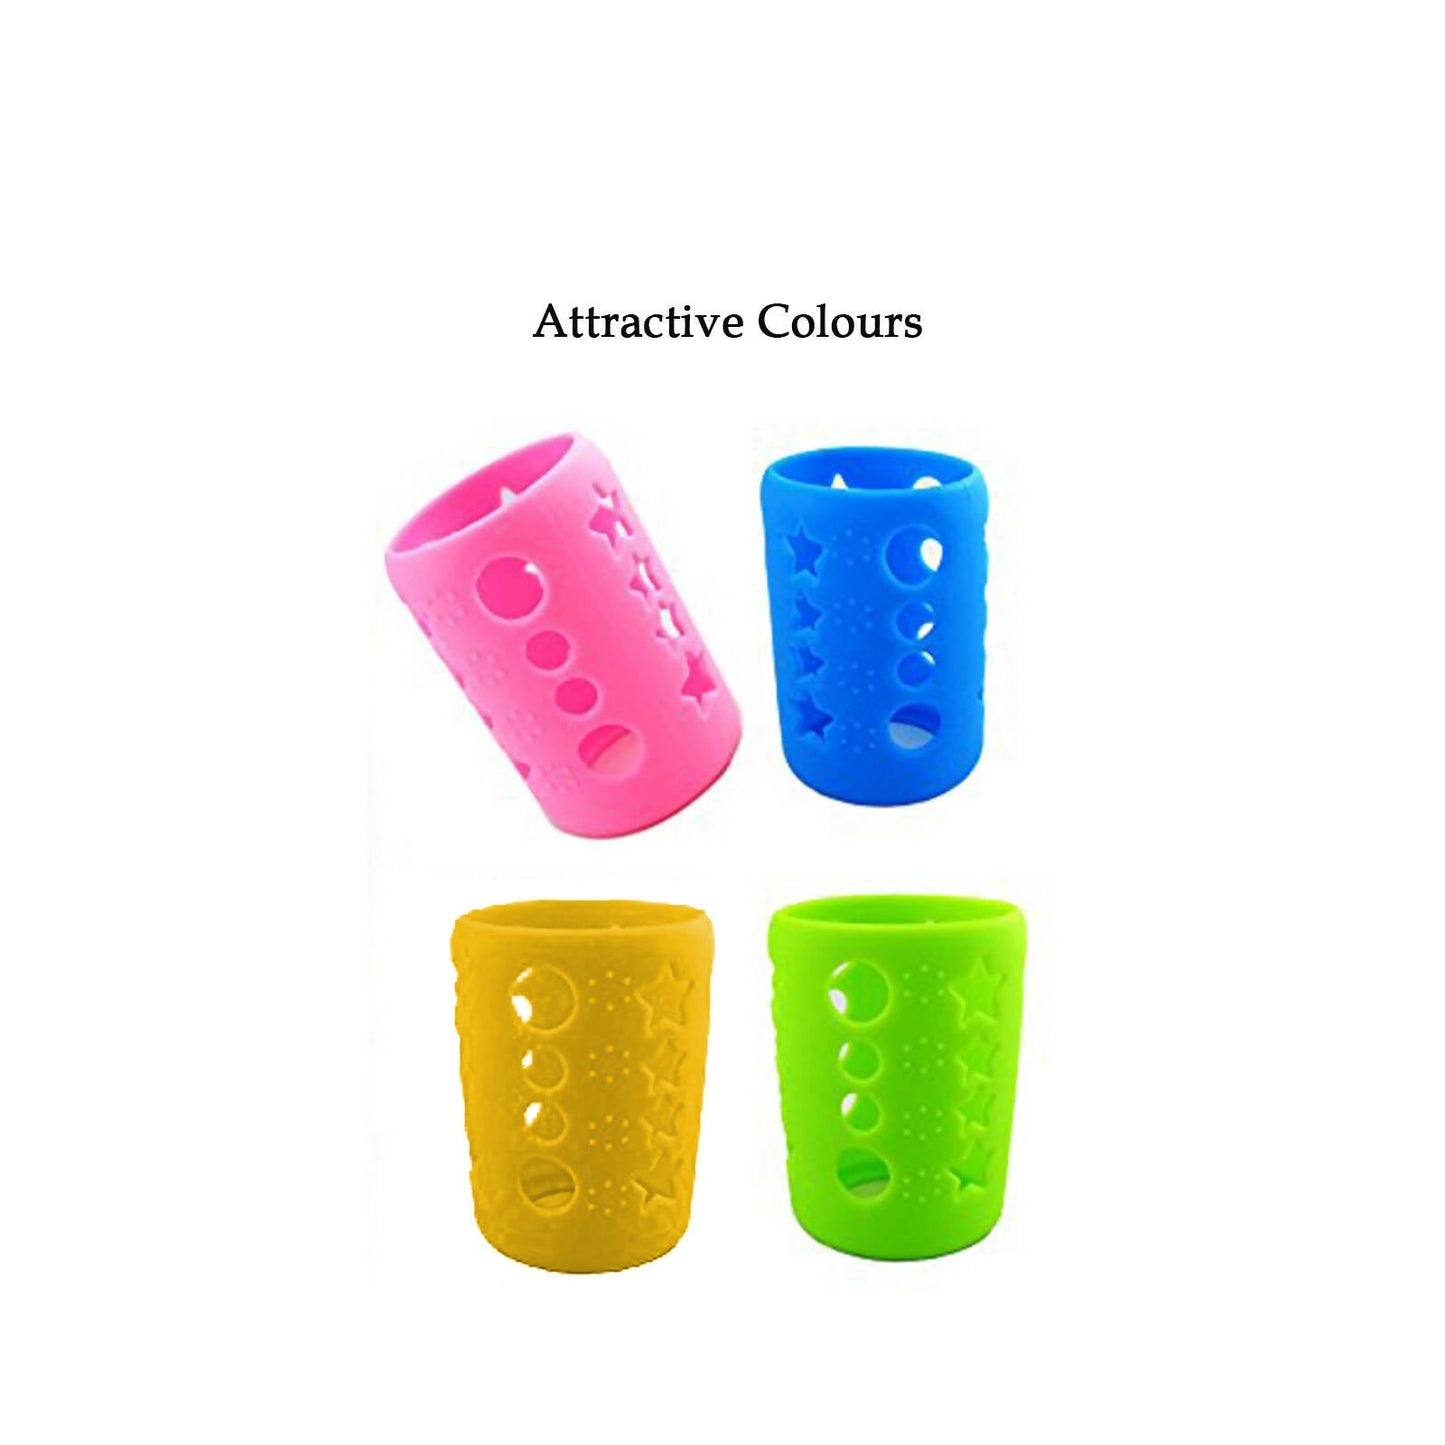 Safe-O-Kid Silicone Baby Feeding Bottle Cover Cum Sleeve for Insulated Protection 120mL- Yellow